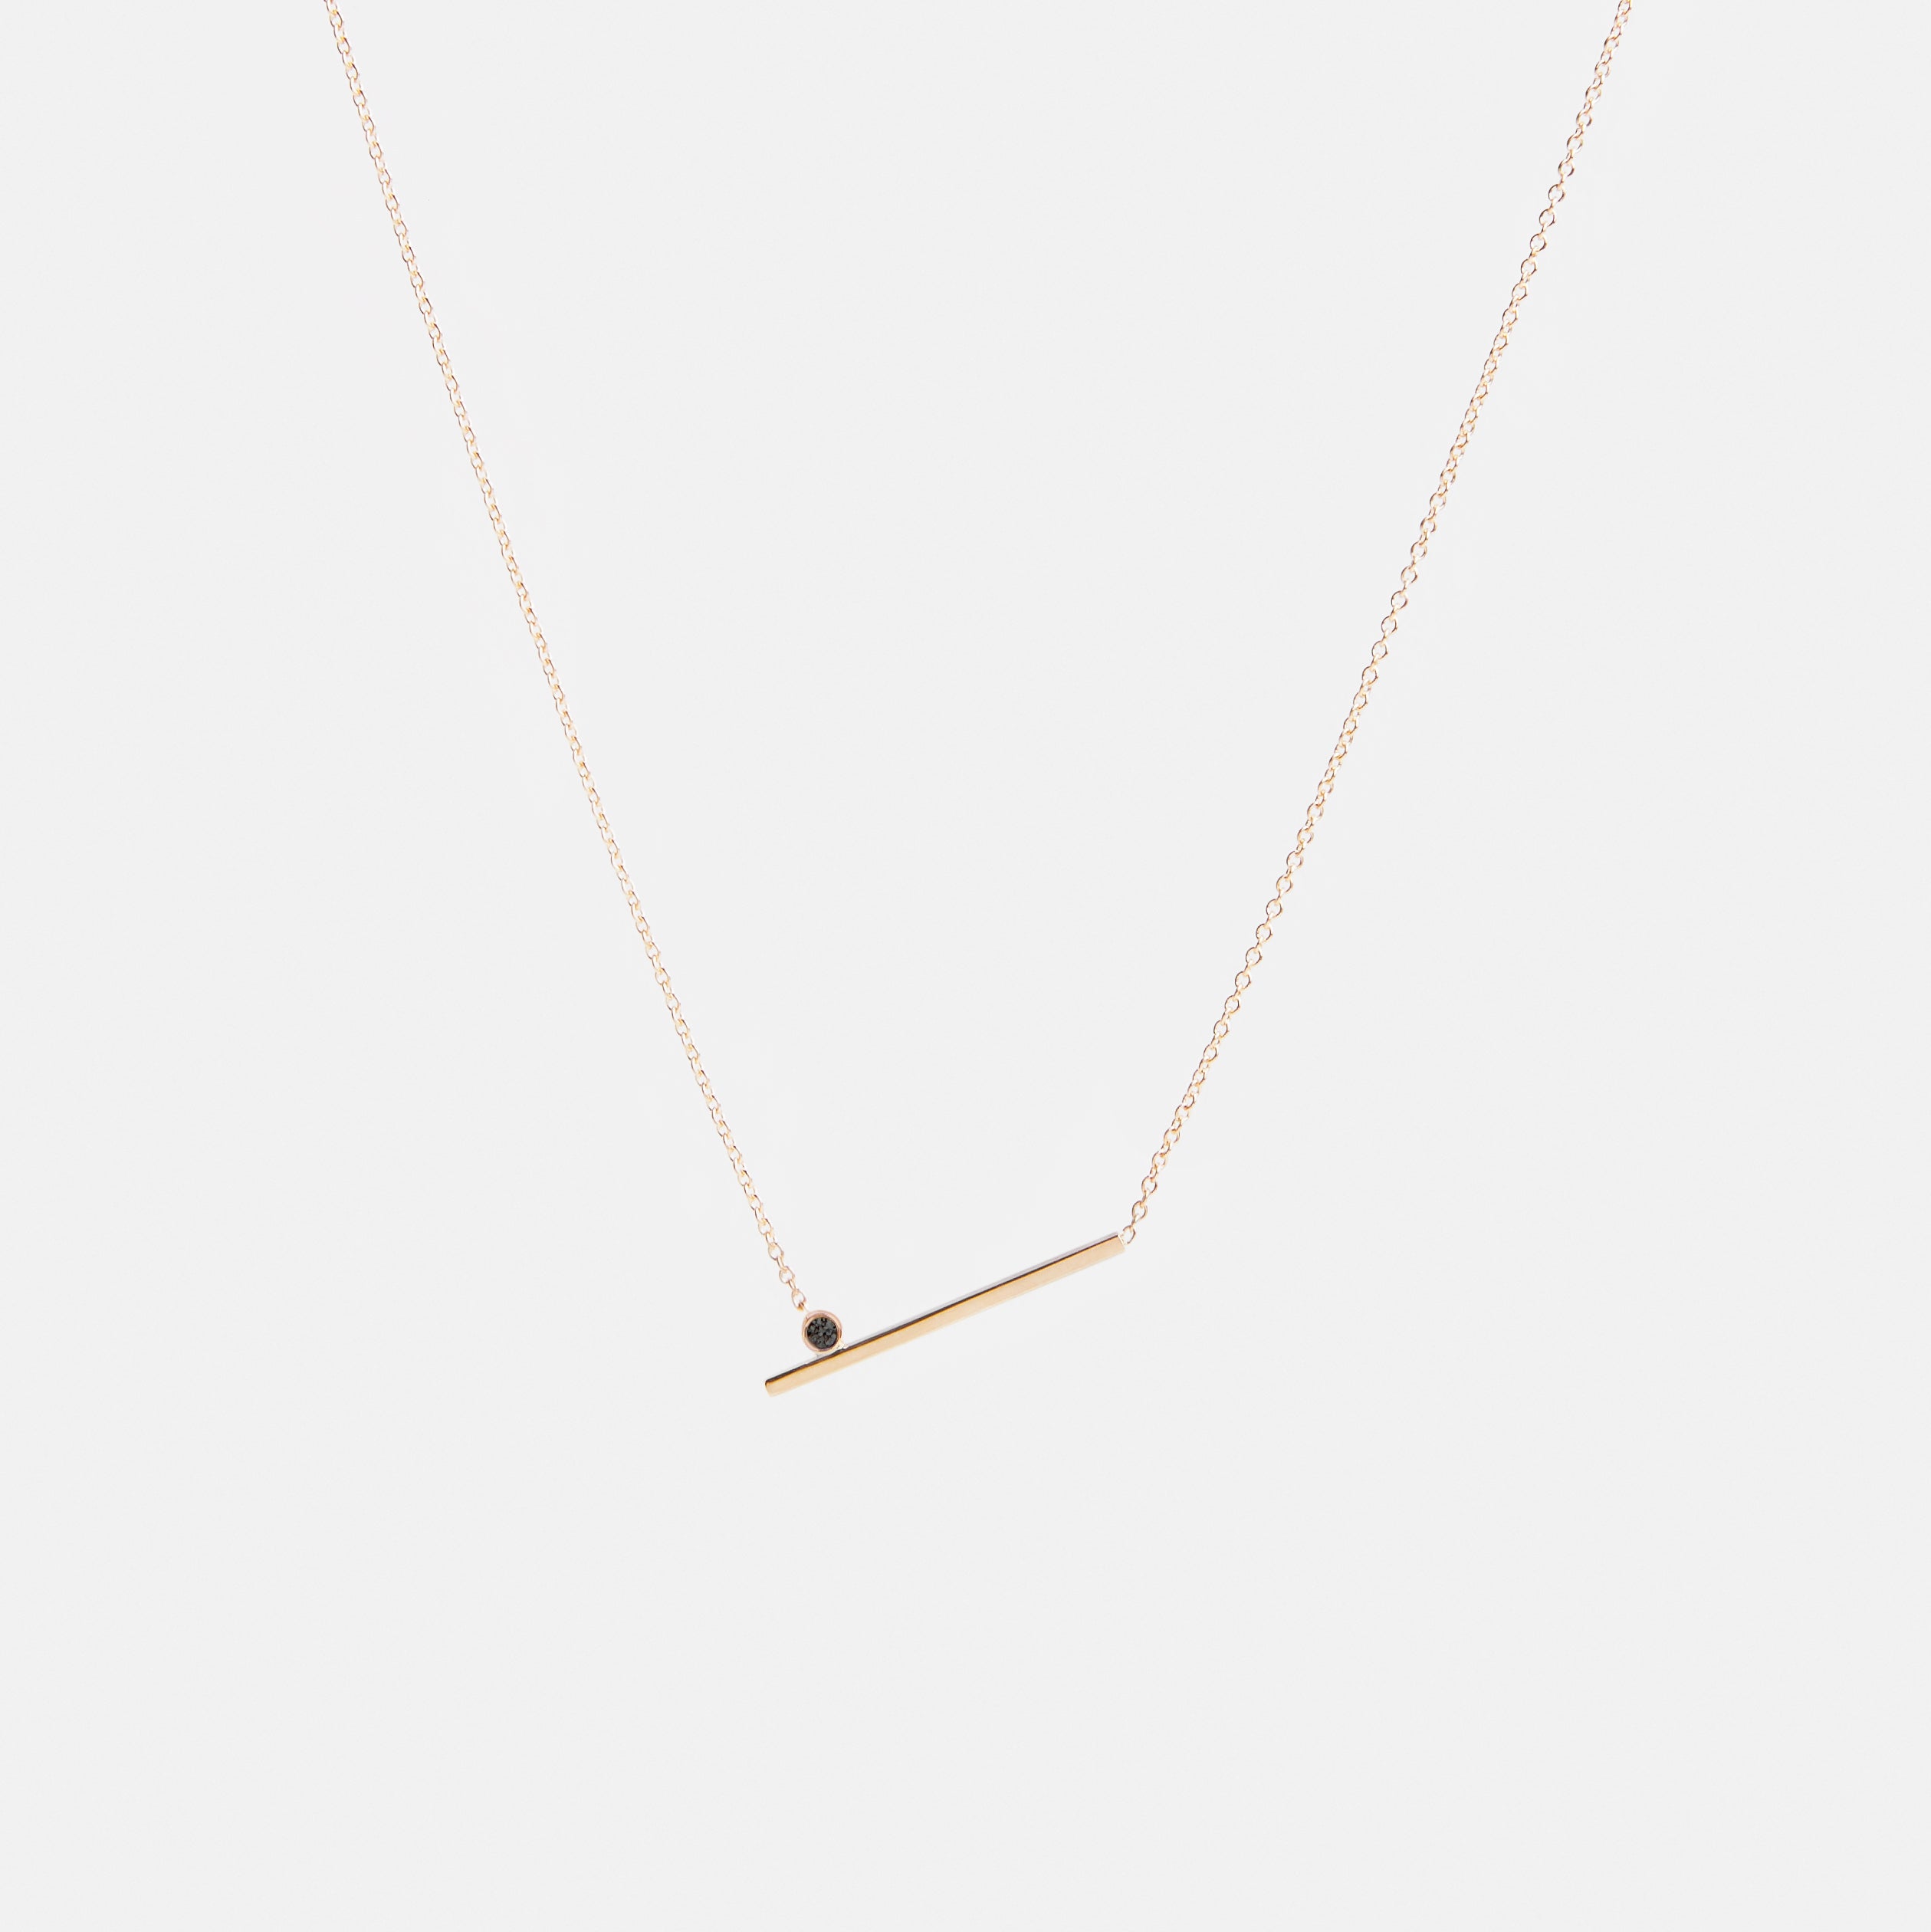 Livi Unconventional Necklace in 14k Gold Set with Black Diamond By SHW Fine Jewelry NYC